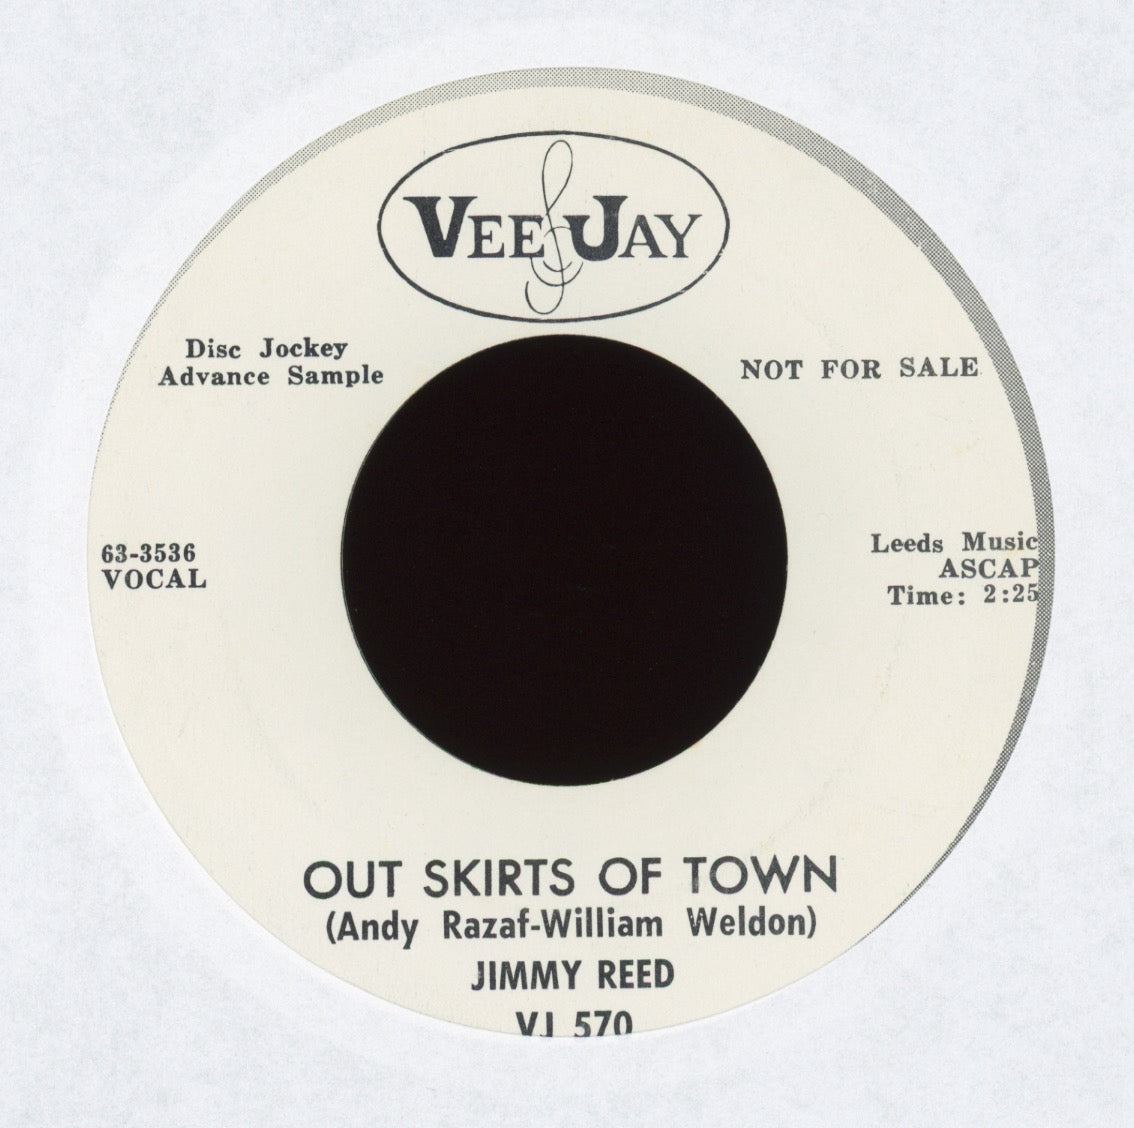 Jimmy Reed - Out Skirts Of Town on Vee Jay Promo